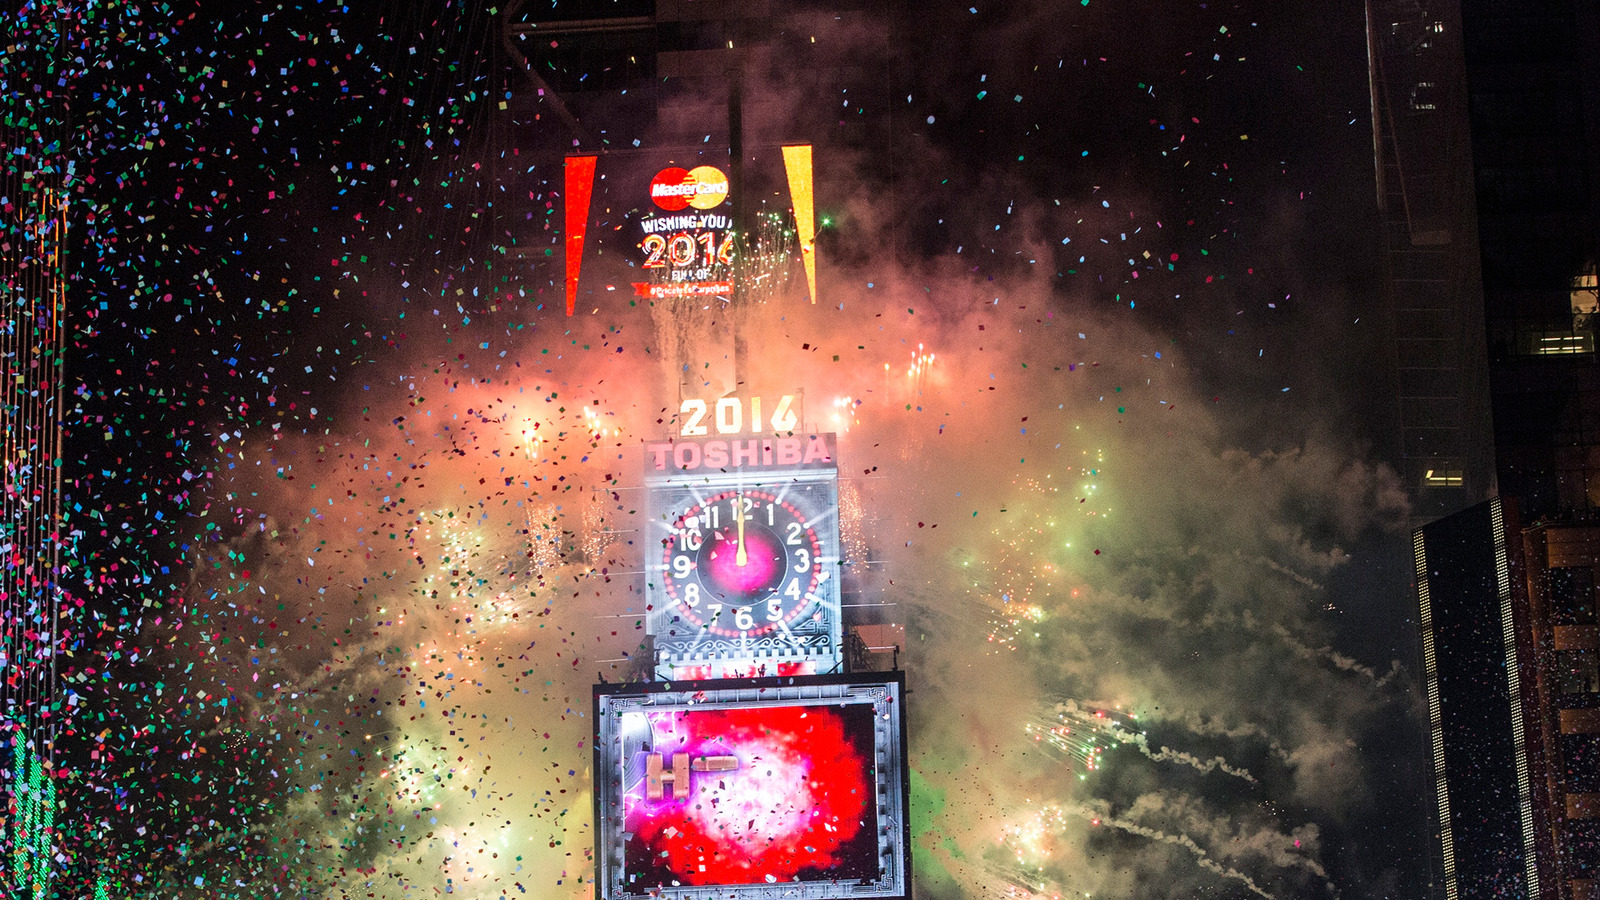 The Only Times The Times Square New Year's Eve Ball Drop Was Cancelled